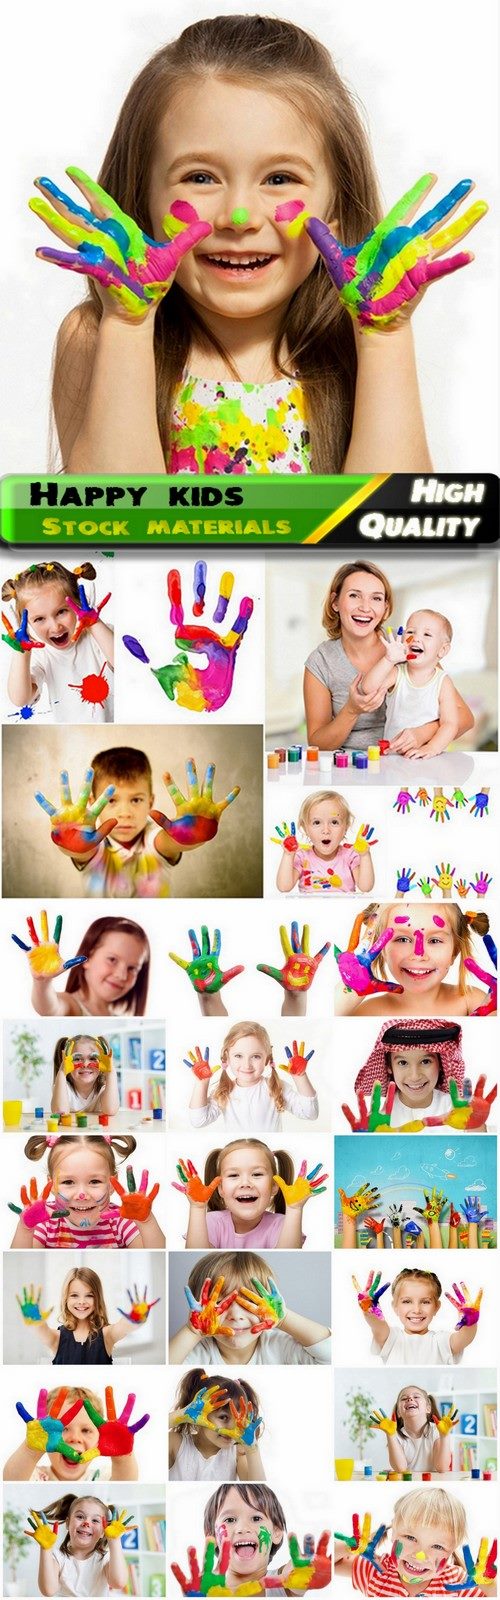 Happy kids with dirty hands in colorful coloring - 25 HQ Jpg